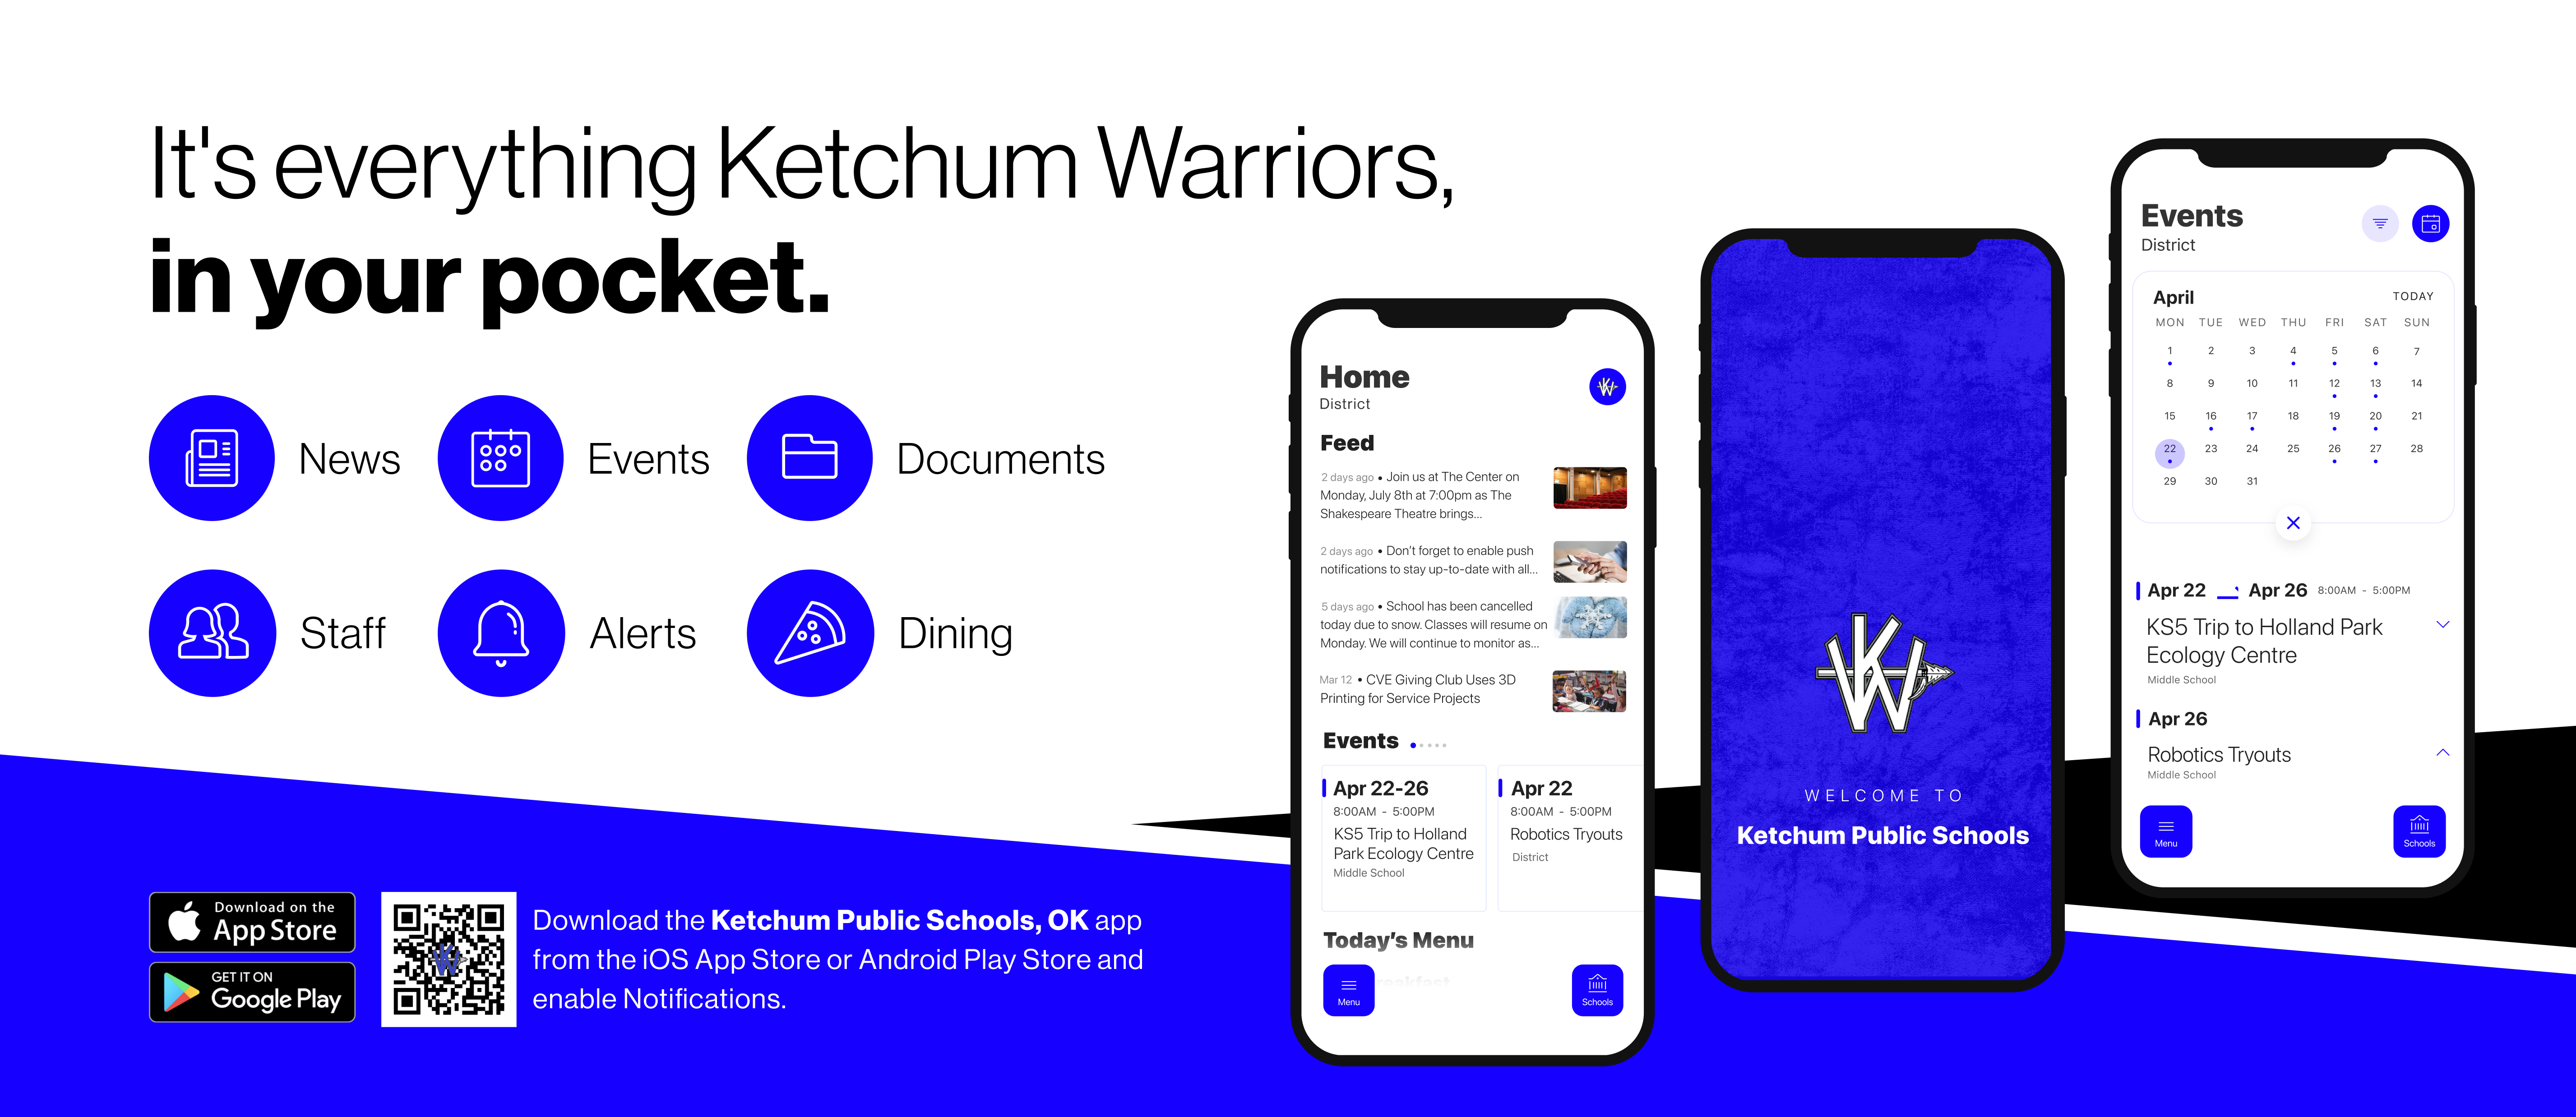 It's everything Ketchum Public Schools, in your pocket.